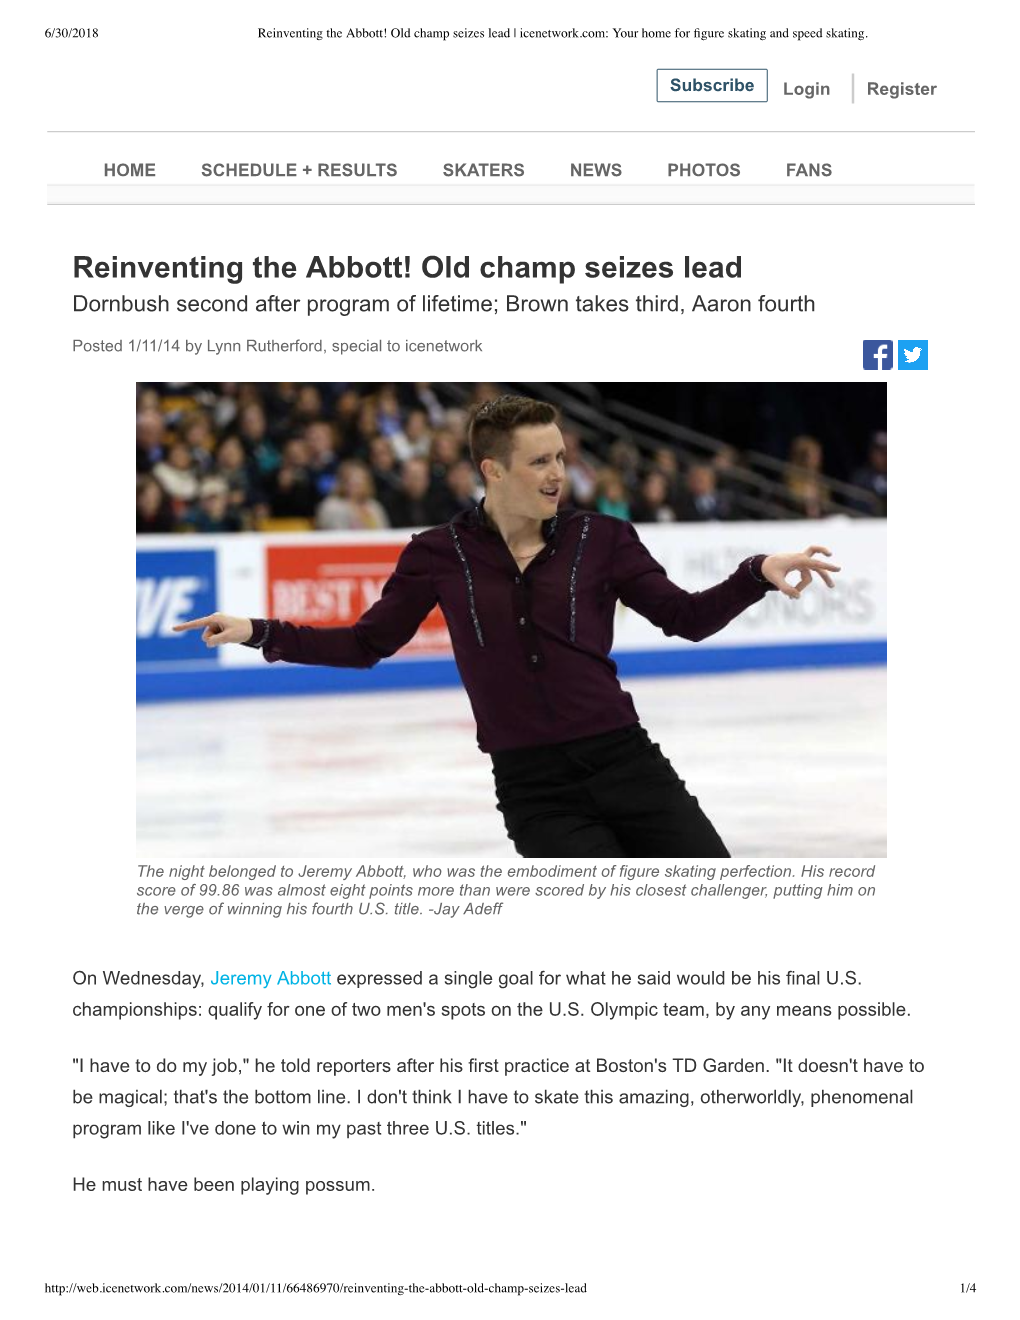 Reinventing the Abbott! Old Champ Seizes Lead | Icenetwork.Com: Your Home for ﬁgure Skating and Speed Skating